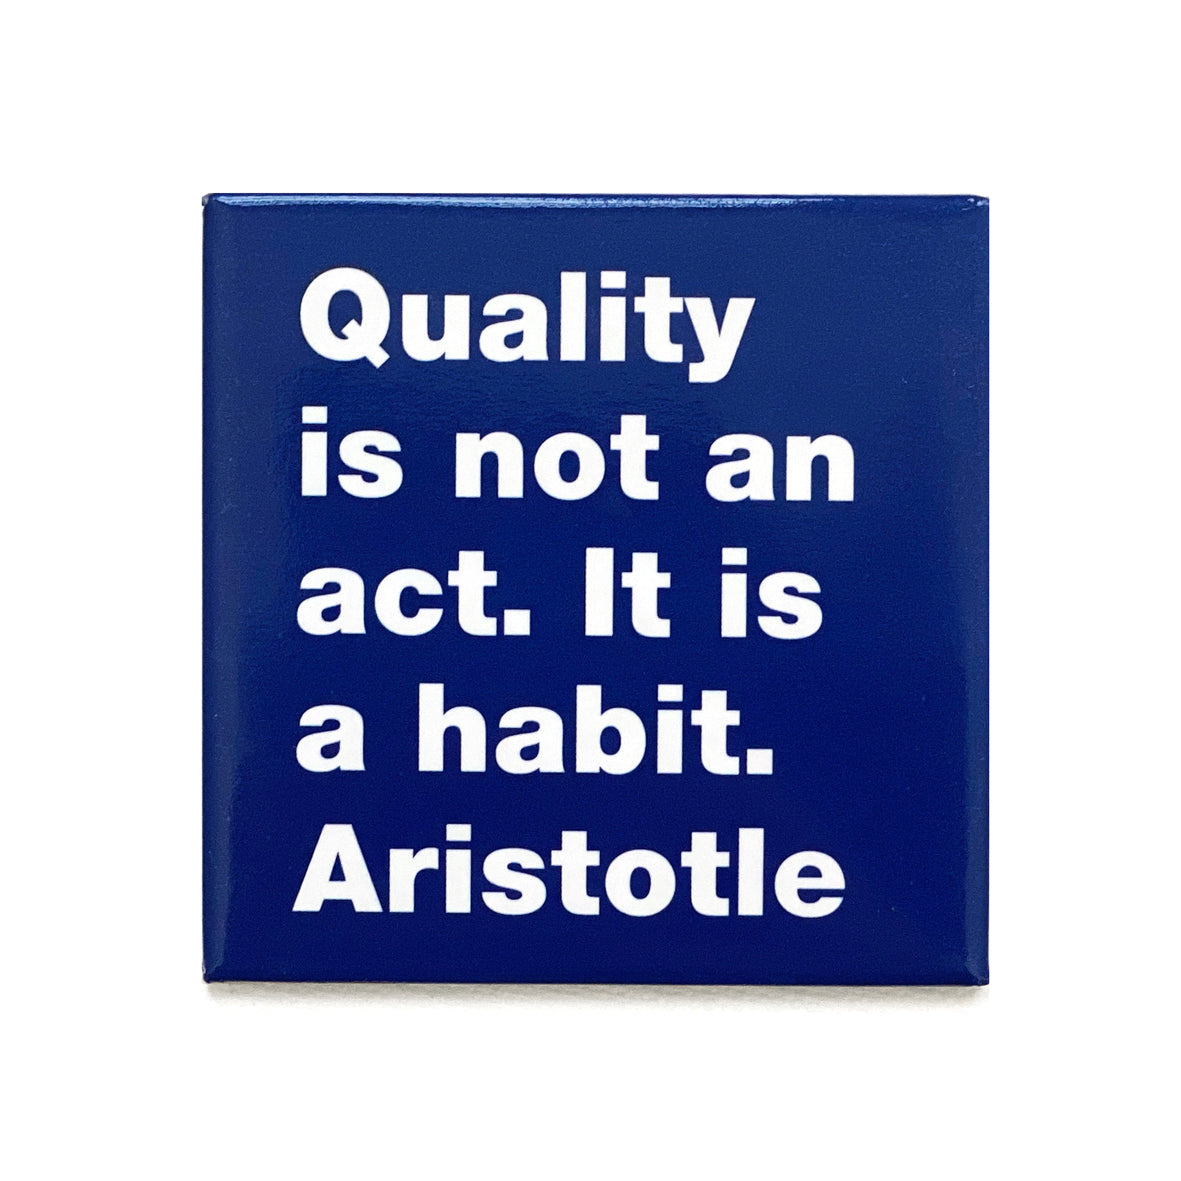 Quality is not an act. It is a habit. Aristotle magnet